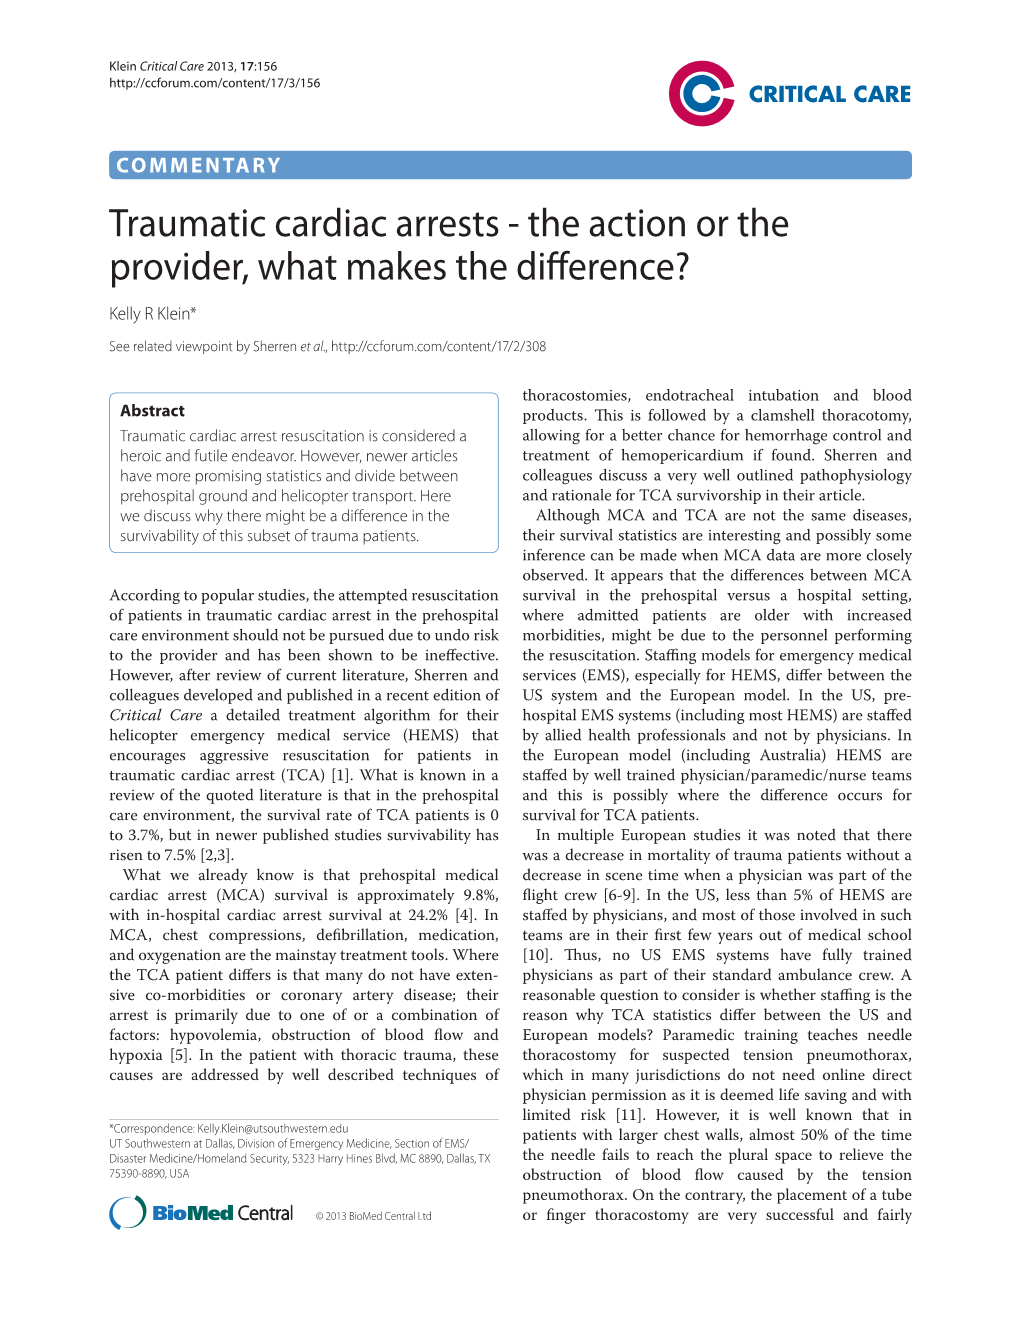 Traumatic Cardiac Arrests - the Action Or the Provider, What Makes the Diff Erence? Kelly R Klein*